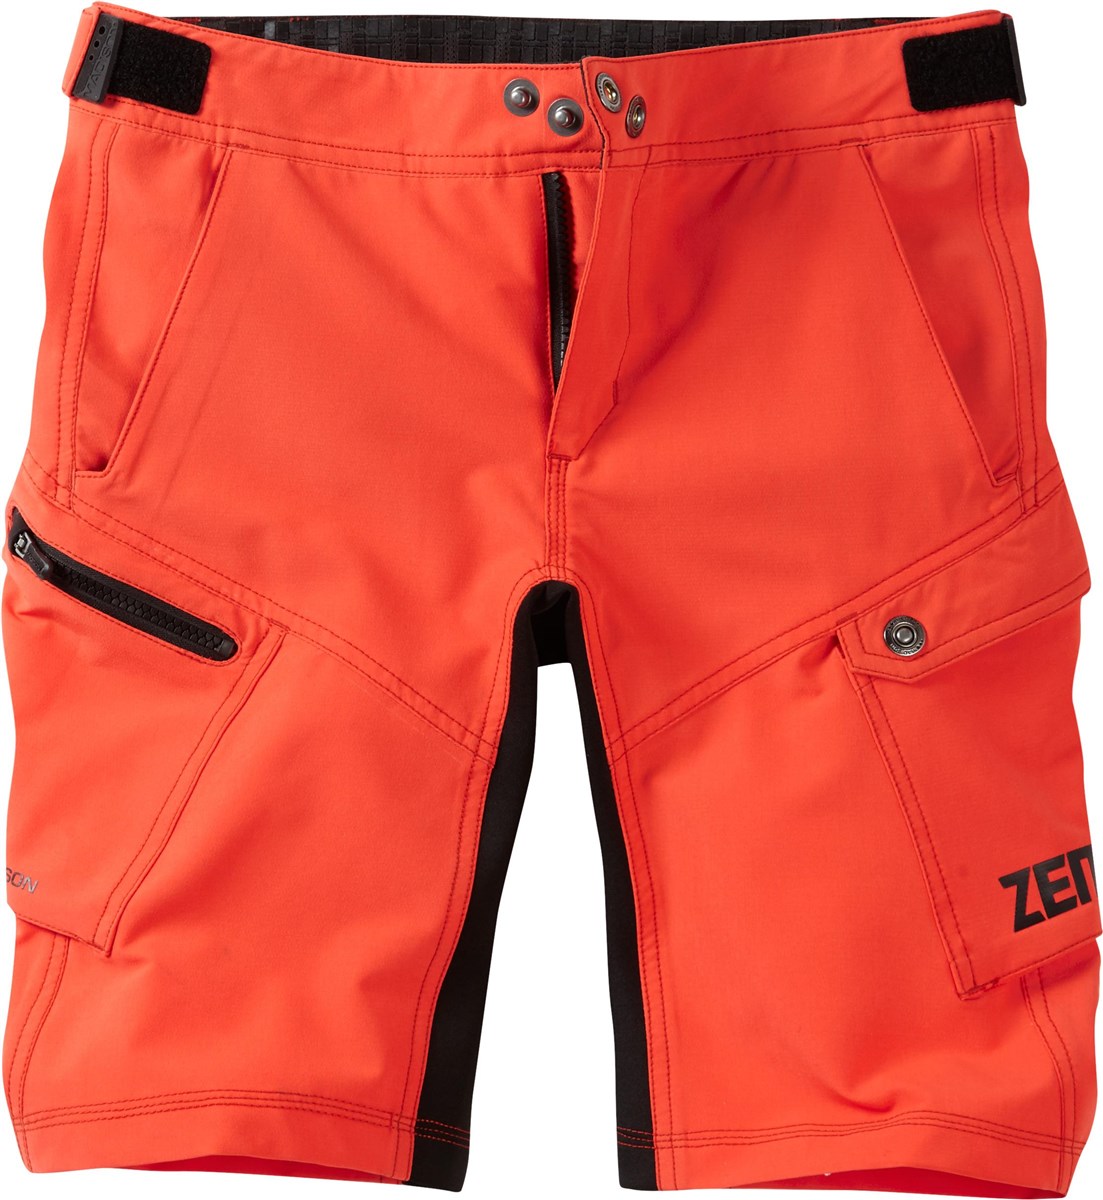 Madison Zen Youth Baggy Cycling Shorts product image